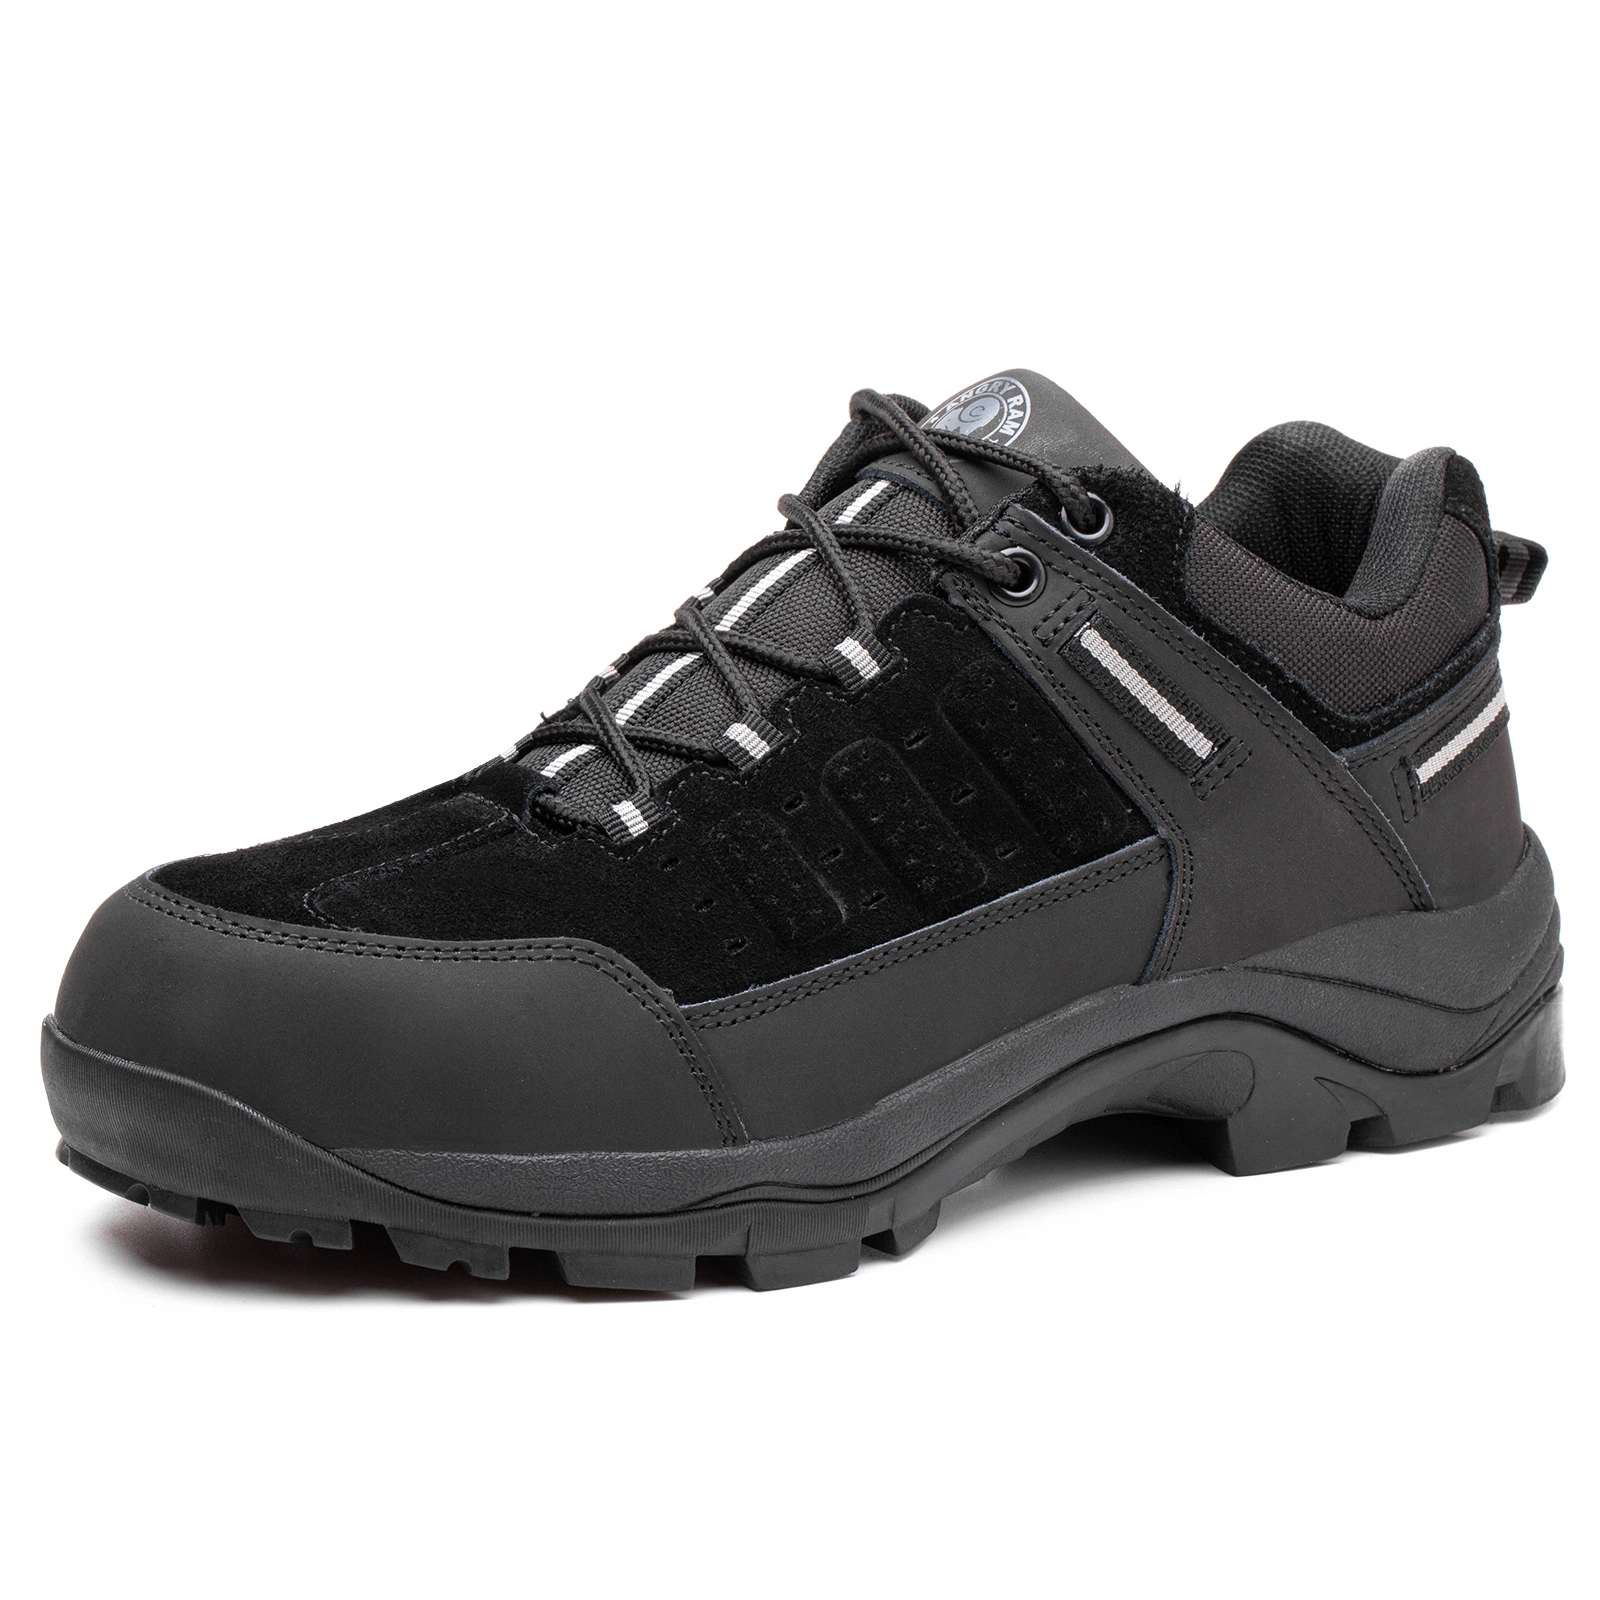 Industrial Labor Protective Steel Toe Shoes with Durable Rubber Sole